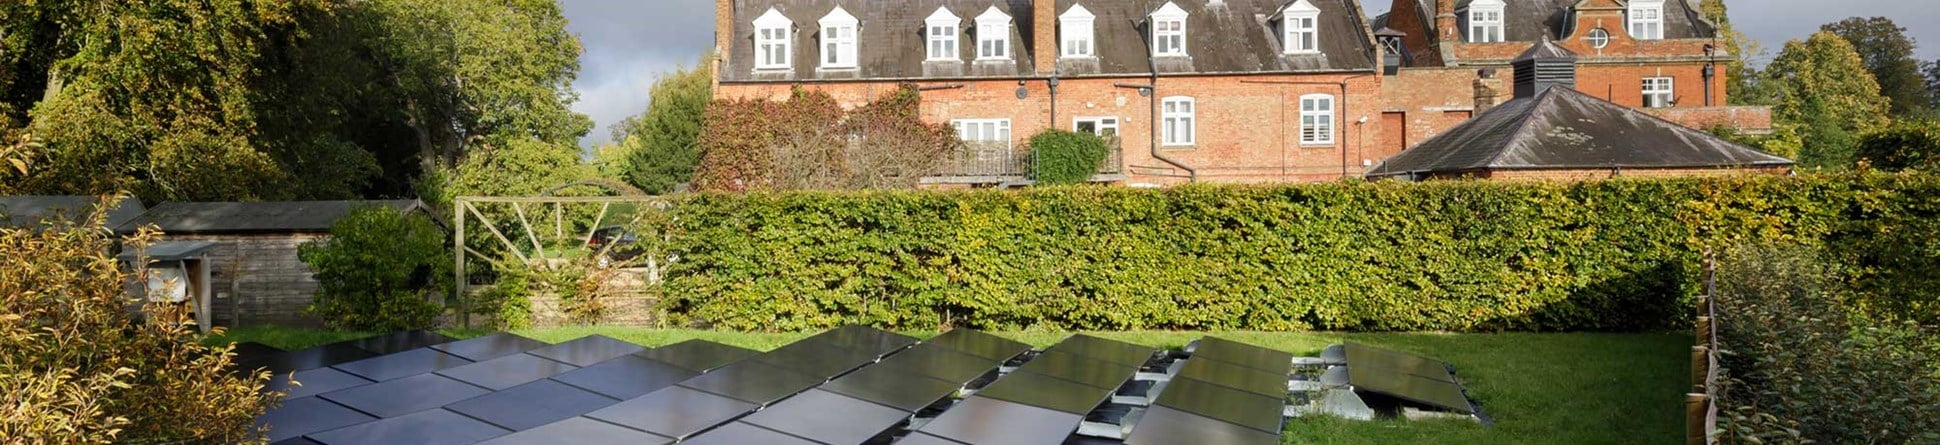 Solar panels surrounded by hedging with a large historic house in the background.